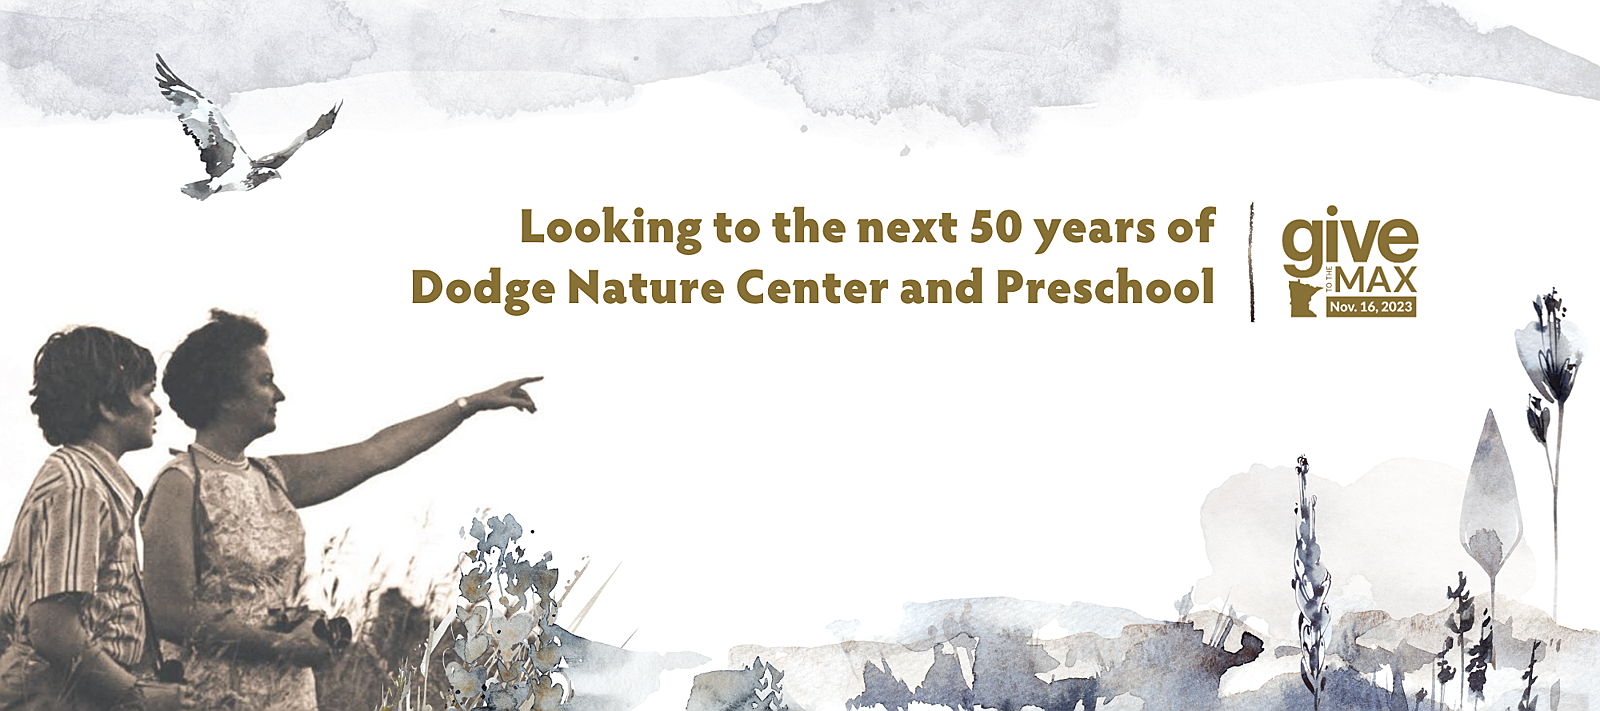 A sepia photo of a young boy and his mother wearing binoculars, pointing into the distance. The photo cropped into a white background, blending into a blue watercolor motif featuring flowers, clouds, and a bird. The image reads "Looking to the next 50 years of Dodge Nature Center and Preschool" with a Give to the Max Day logo.